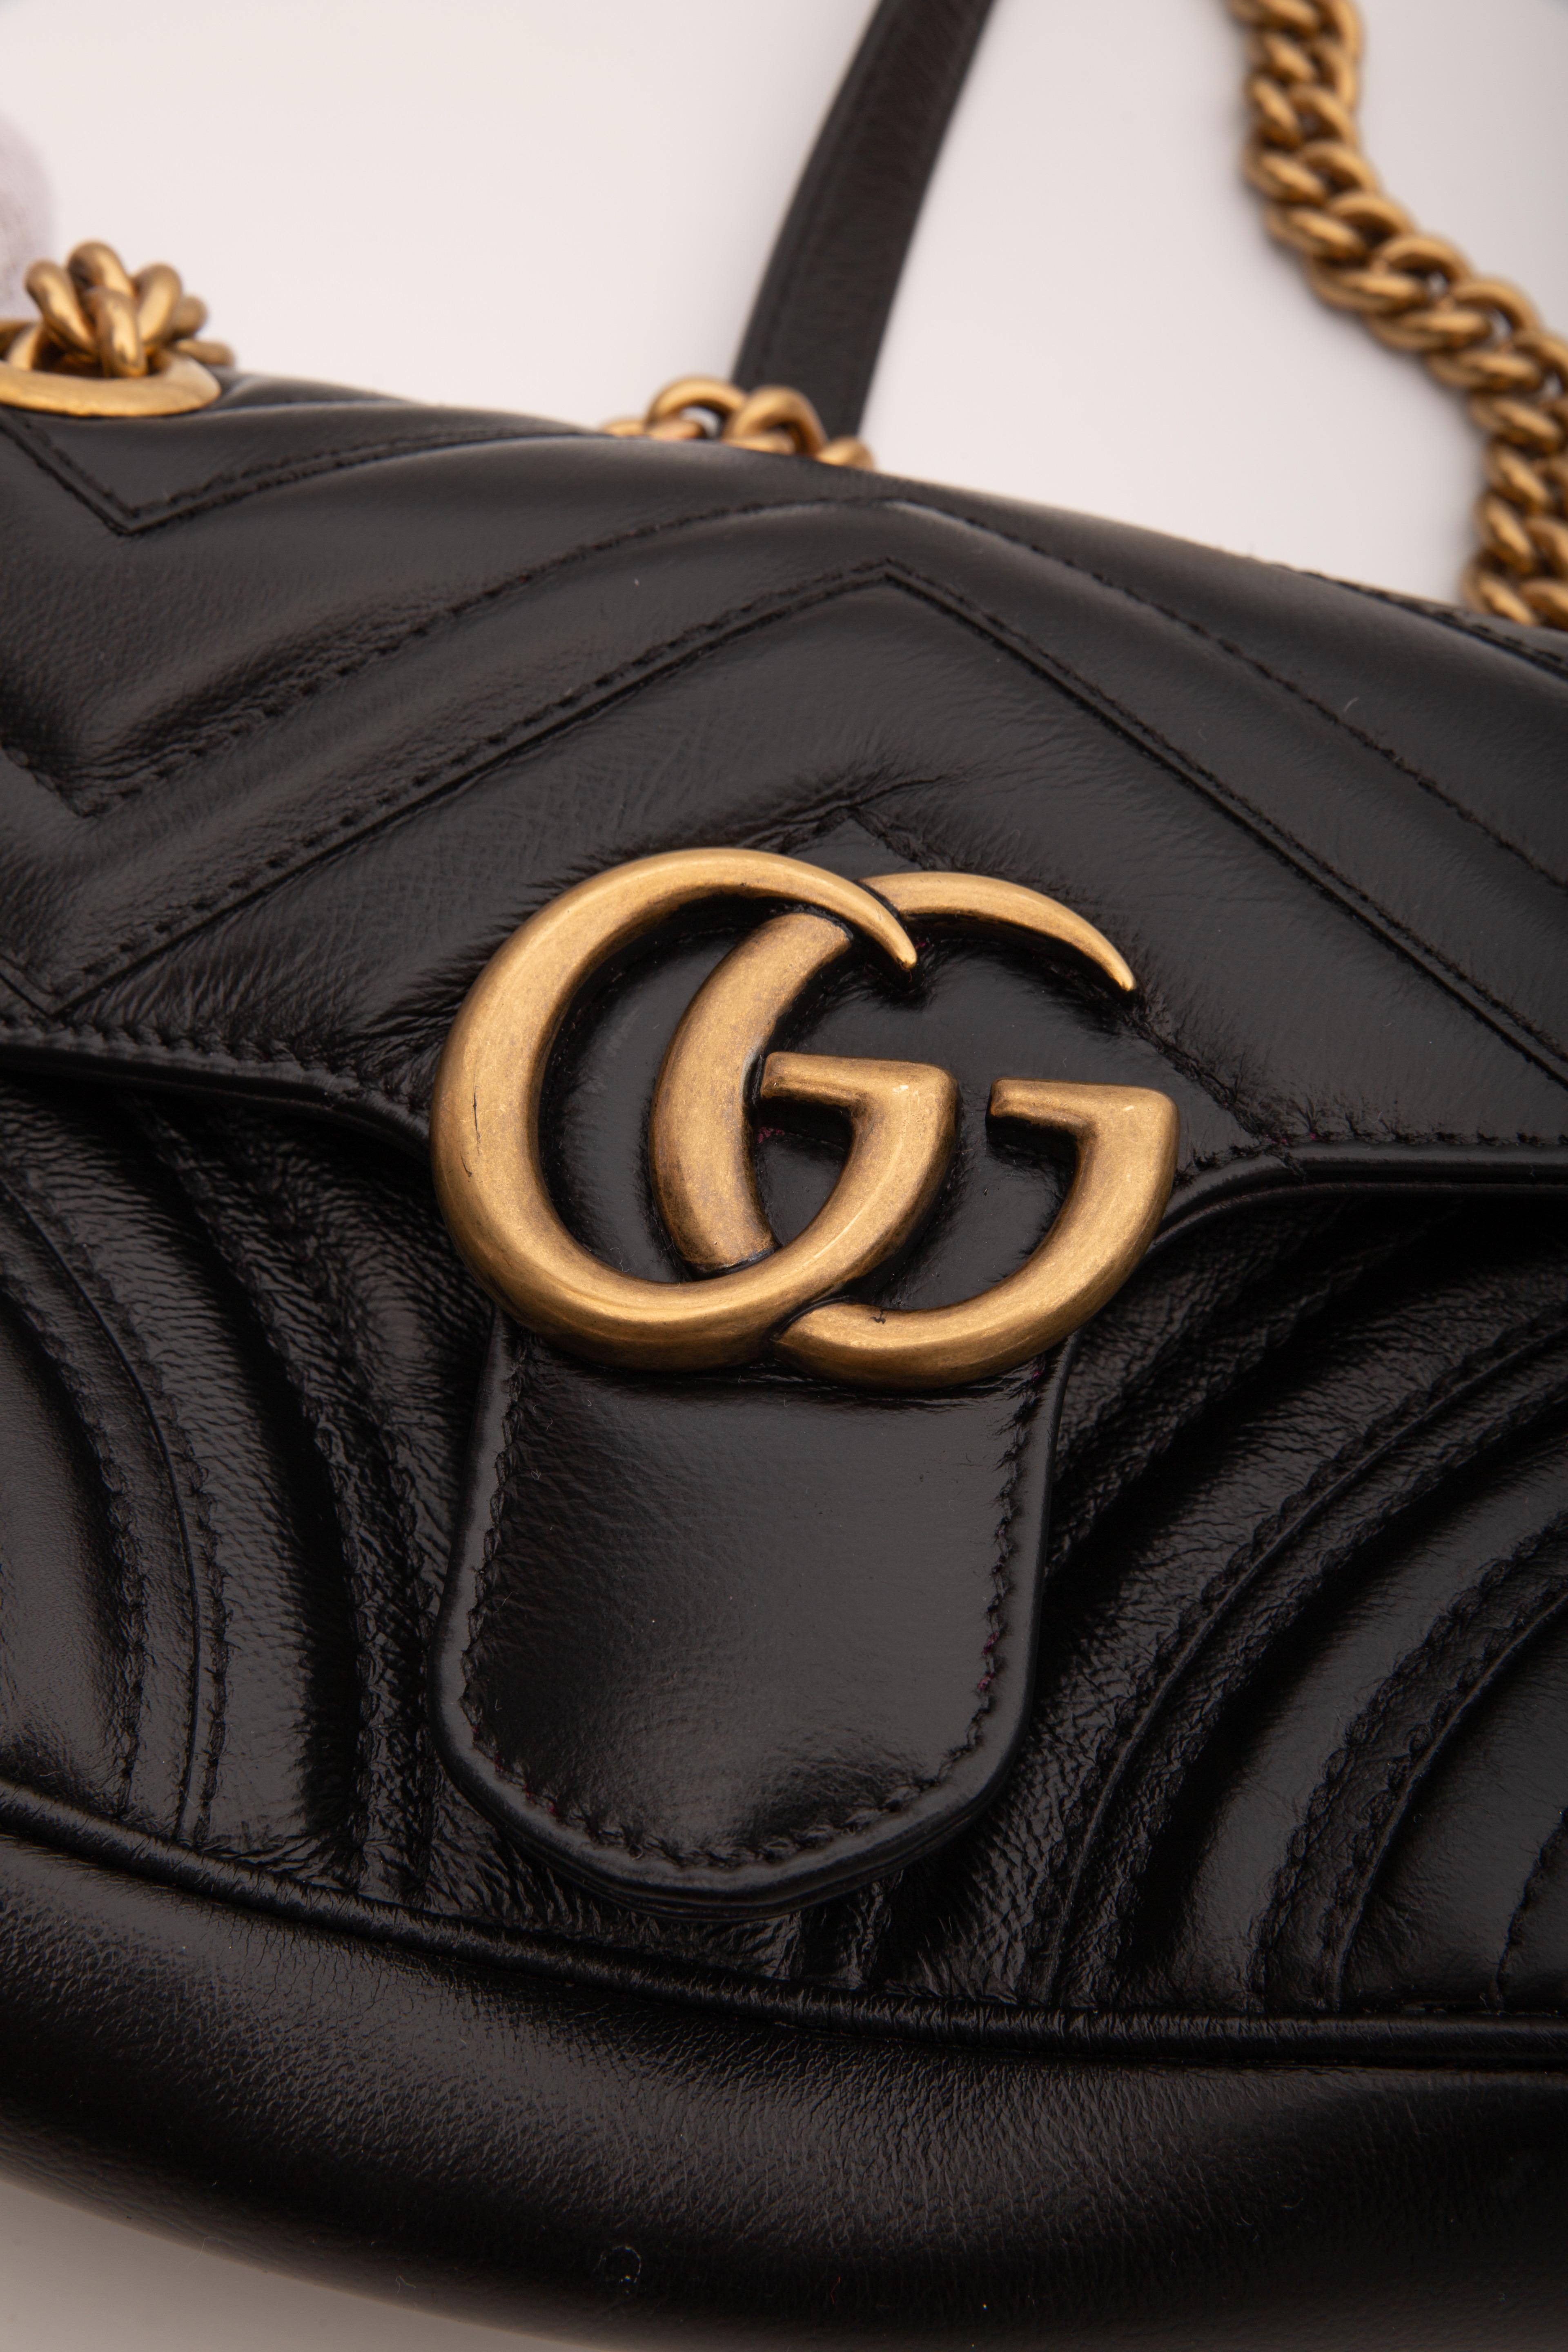 Women's or Men's Gucci Black Leather GG Marmont Bag (446744)